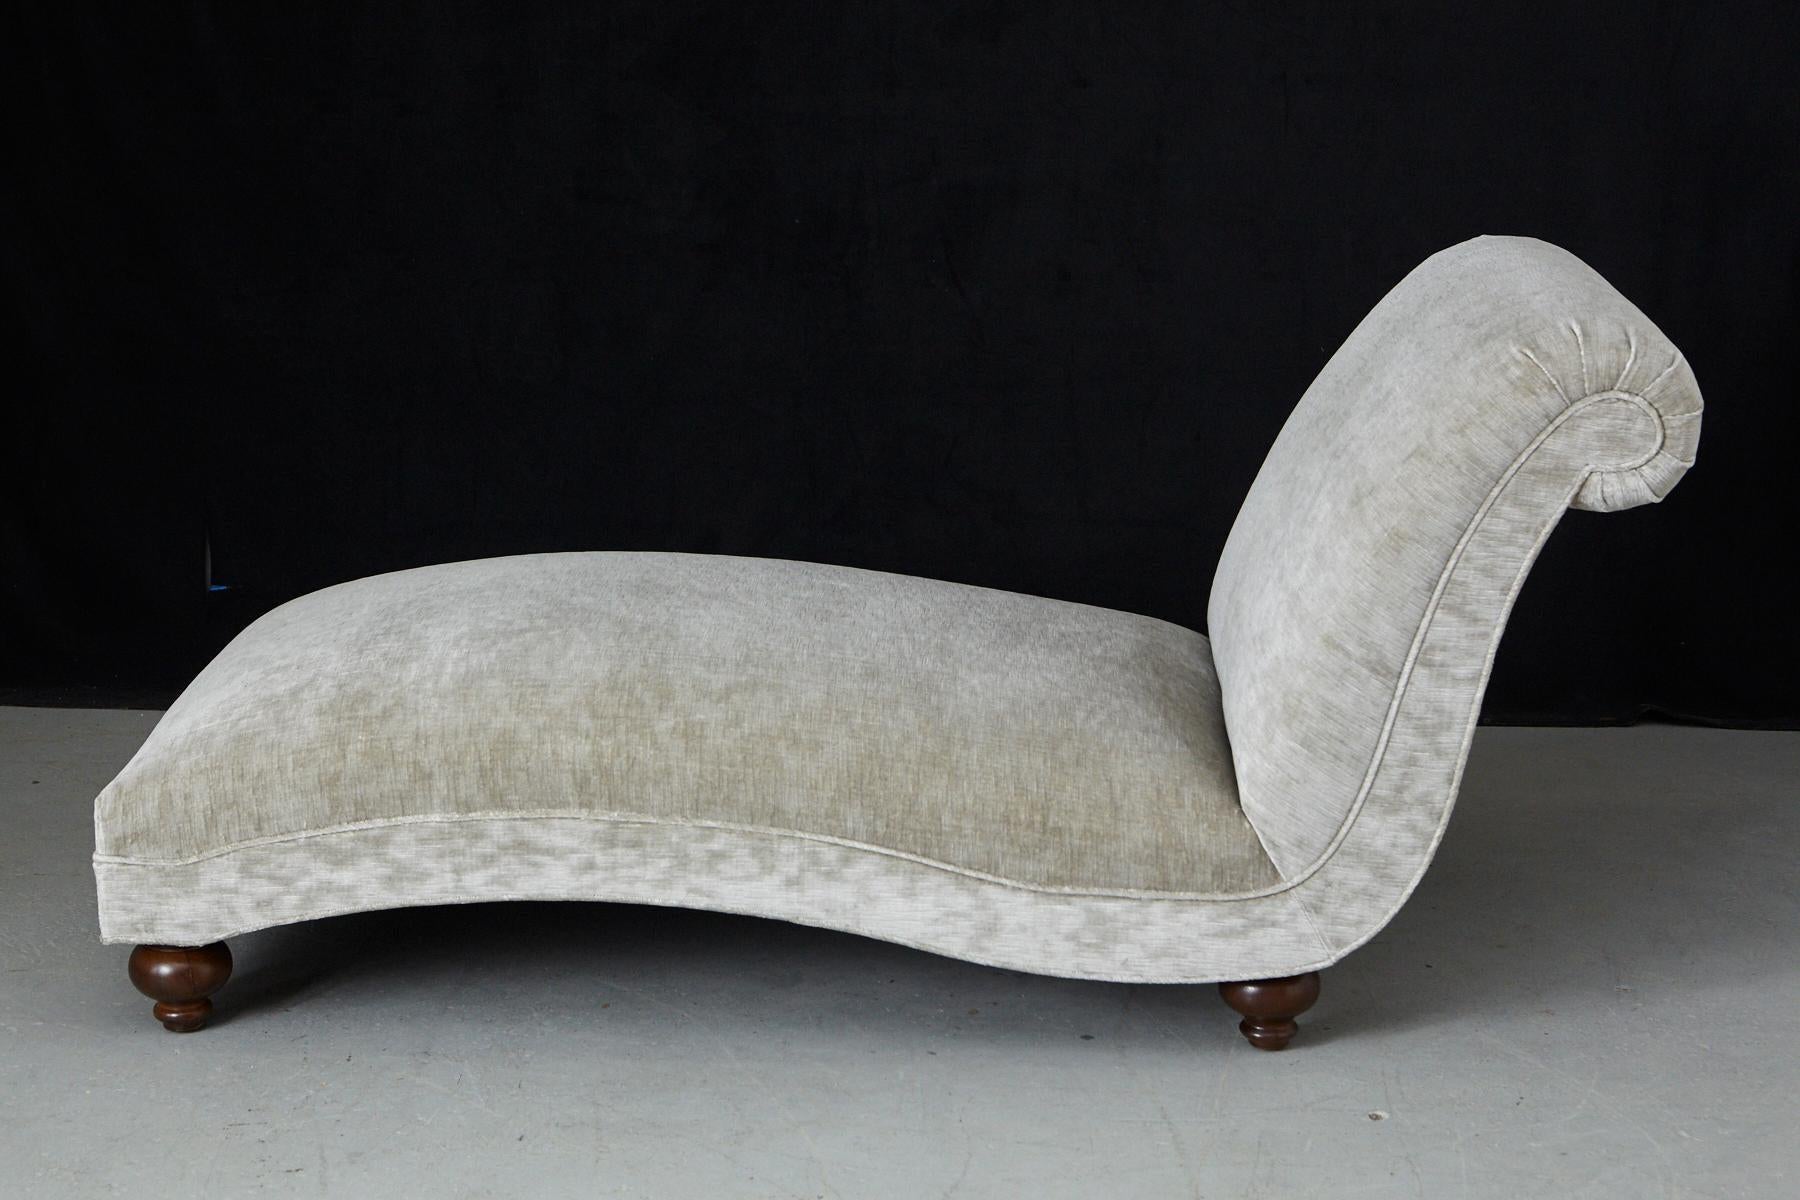 French Chaise Longue with New Upholstery in Striae Velvet, circa 1930s For Sale 3